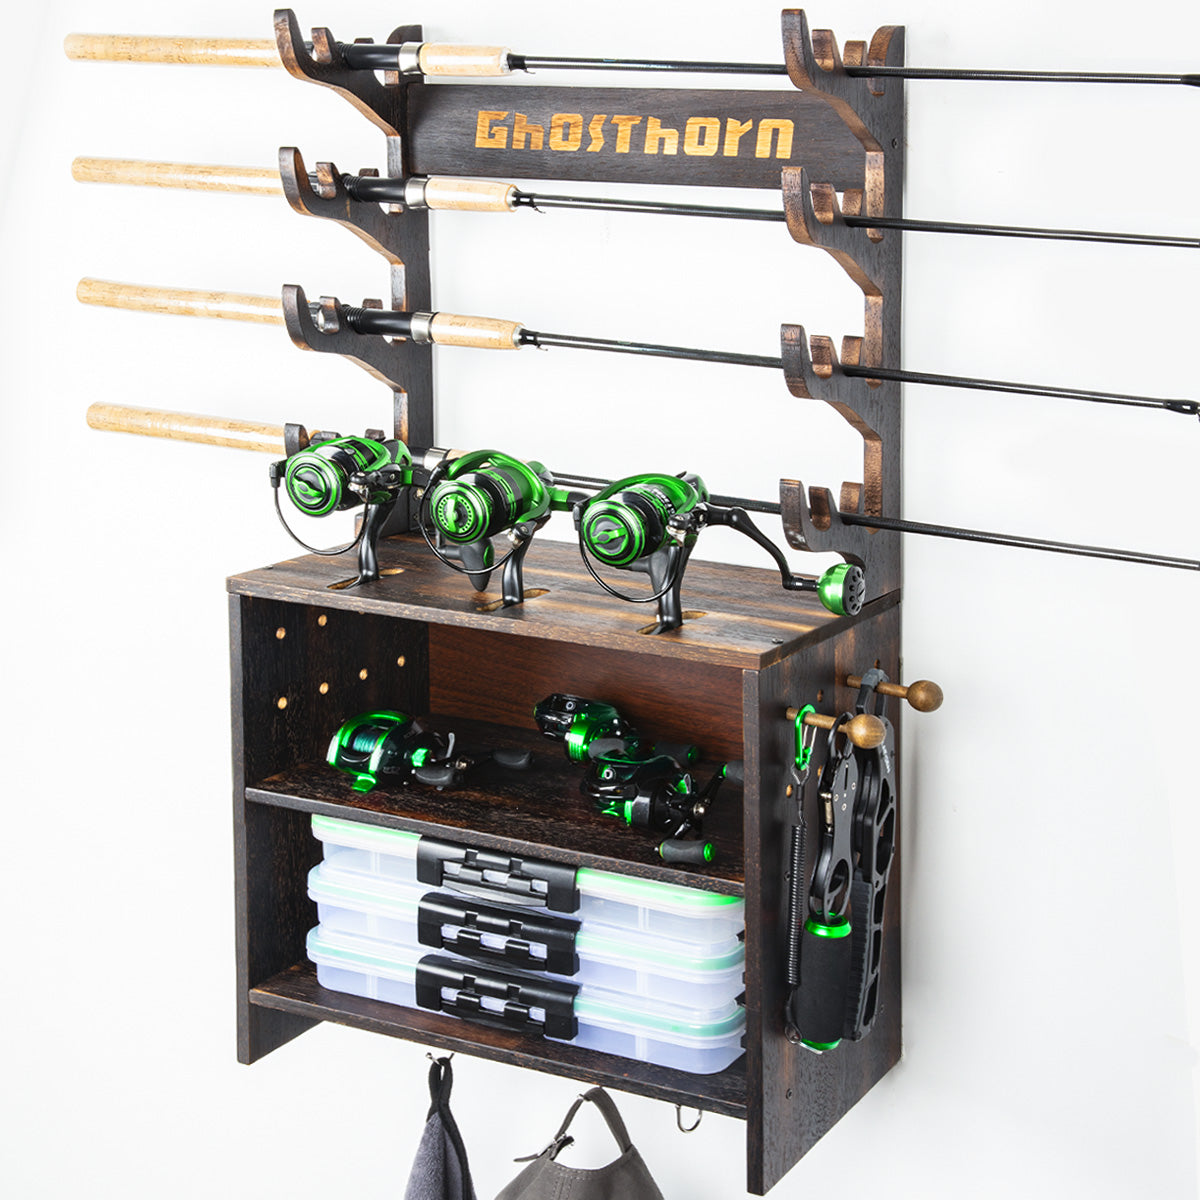 Ghosthorn Fishing Rod Holders for Garage, Fishing Gear and equipment  Rotating Tackle Storage Cart, Pole Rod Rack Hold up to 10 Rods, Fishing  Gifts for